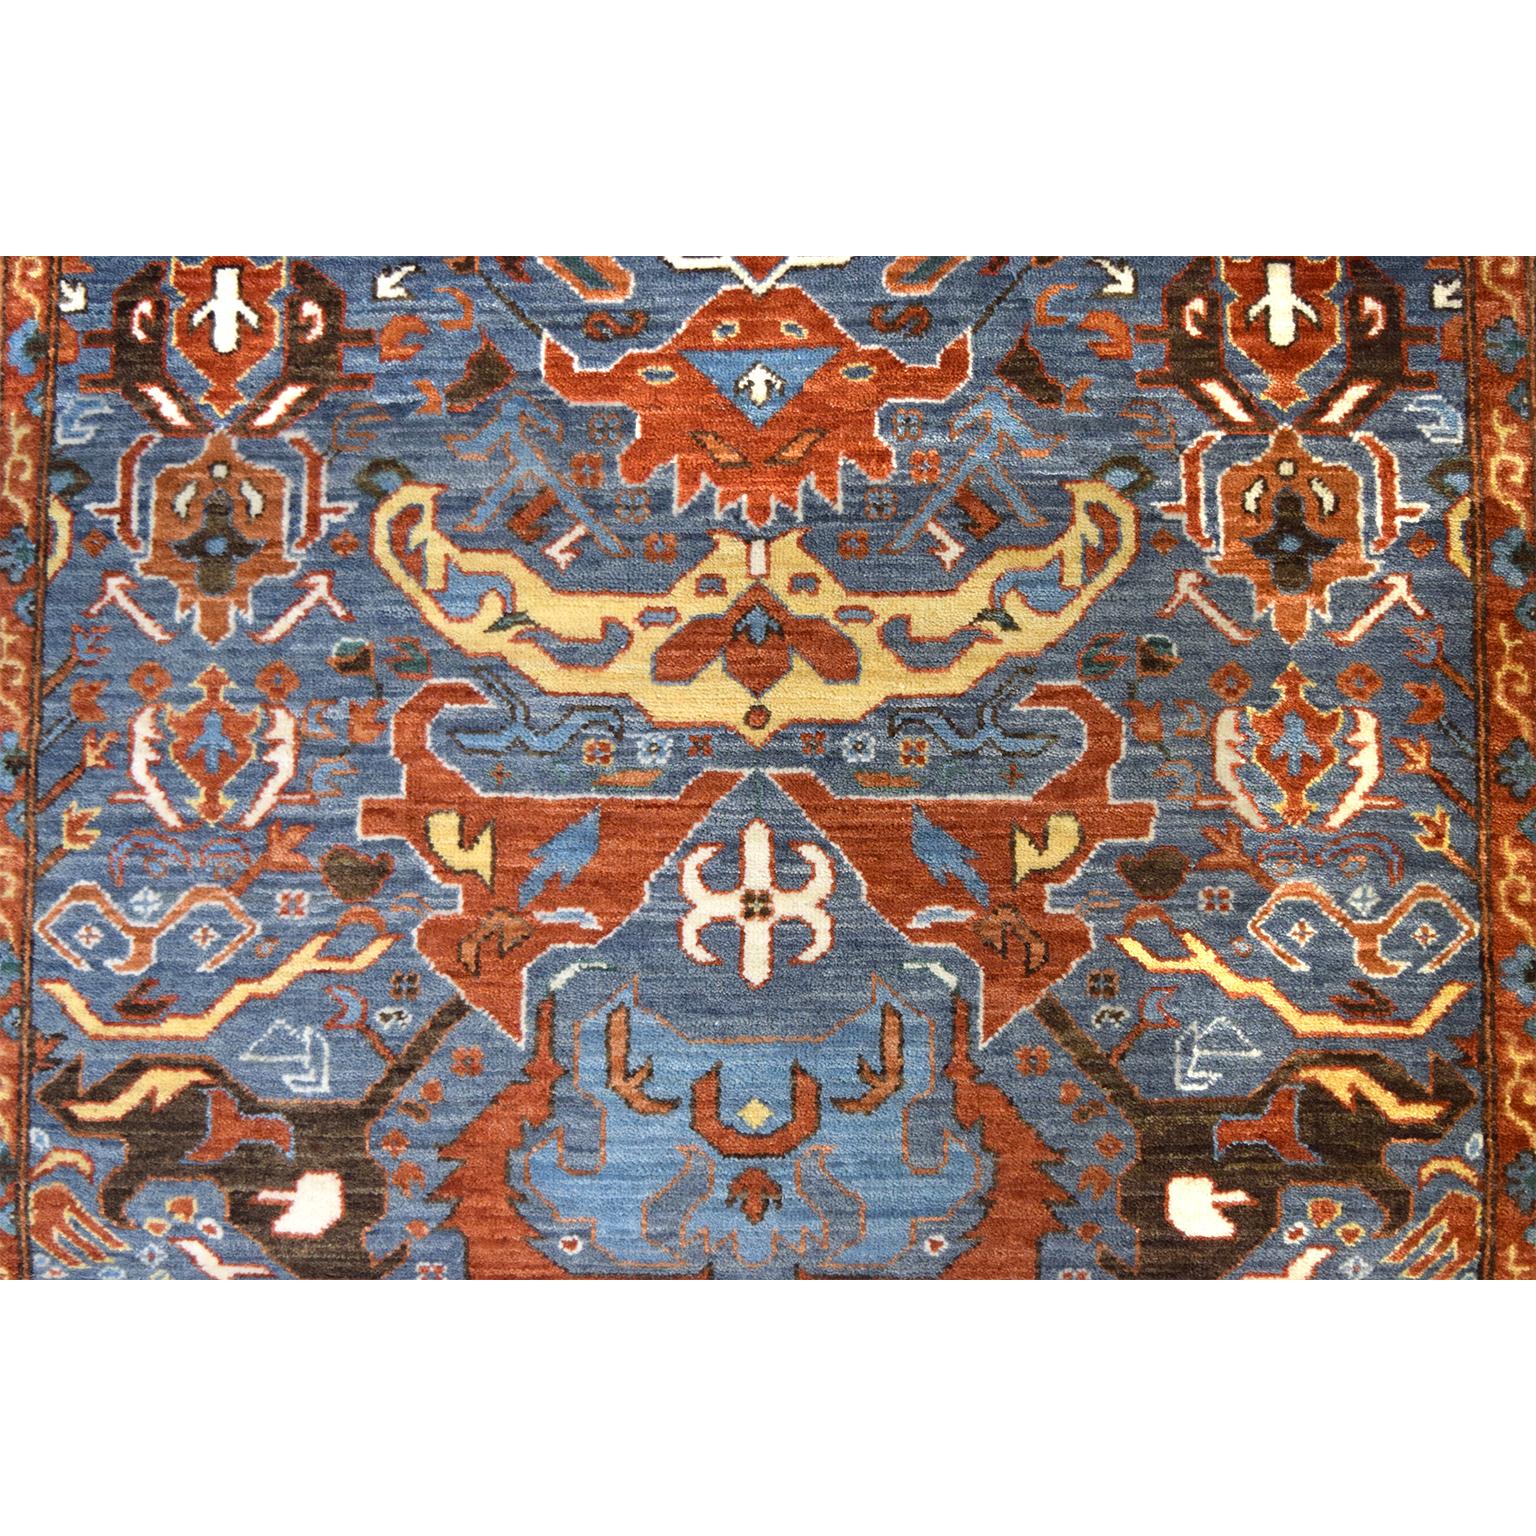 This Karabagh-inspired contemporary area rug in vibrant red and blue tones is part of the Orley Shabahang Tribal Revival collection and measures approximately 3’ x 5’. Like all Orley Shabahang carpets, this piece features handspun wool dyed with